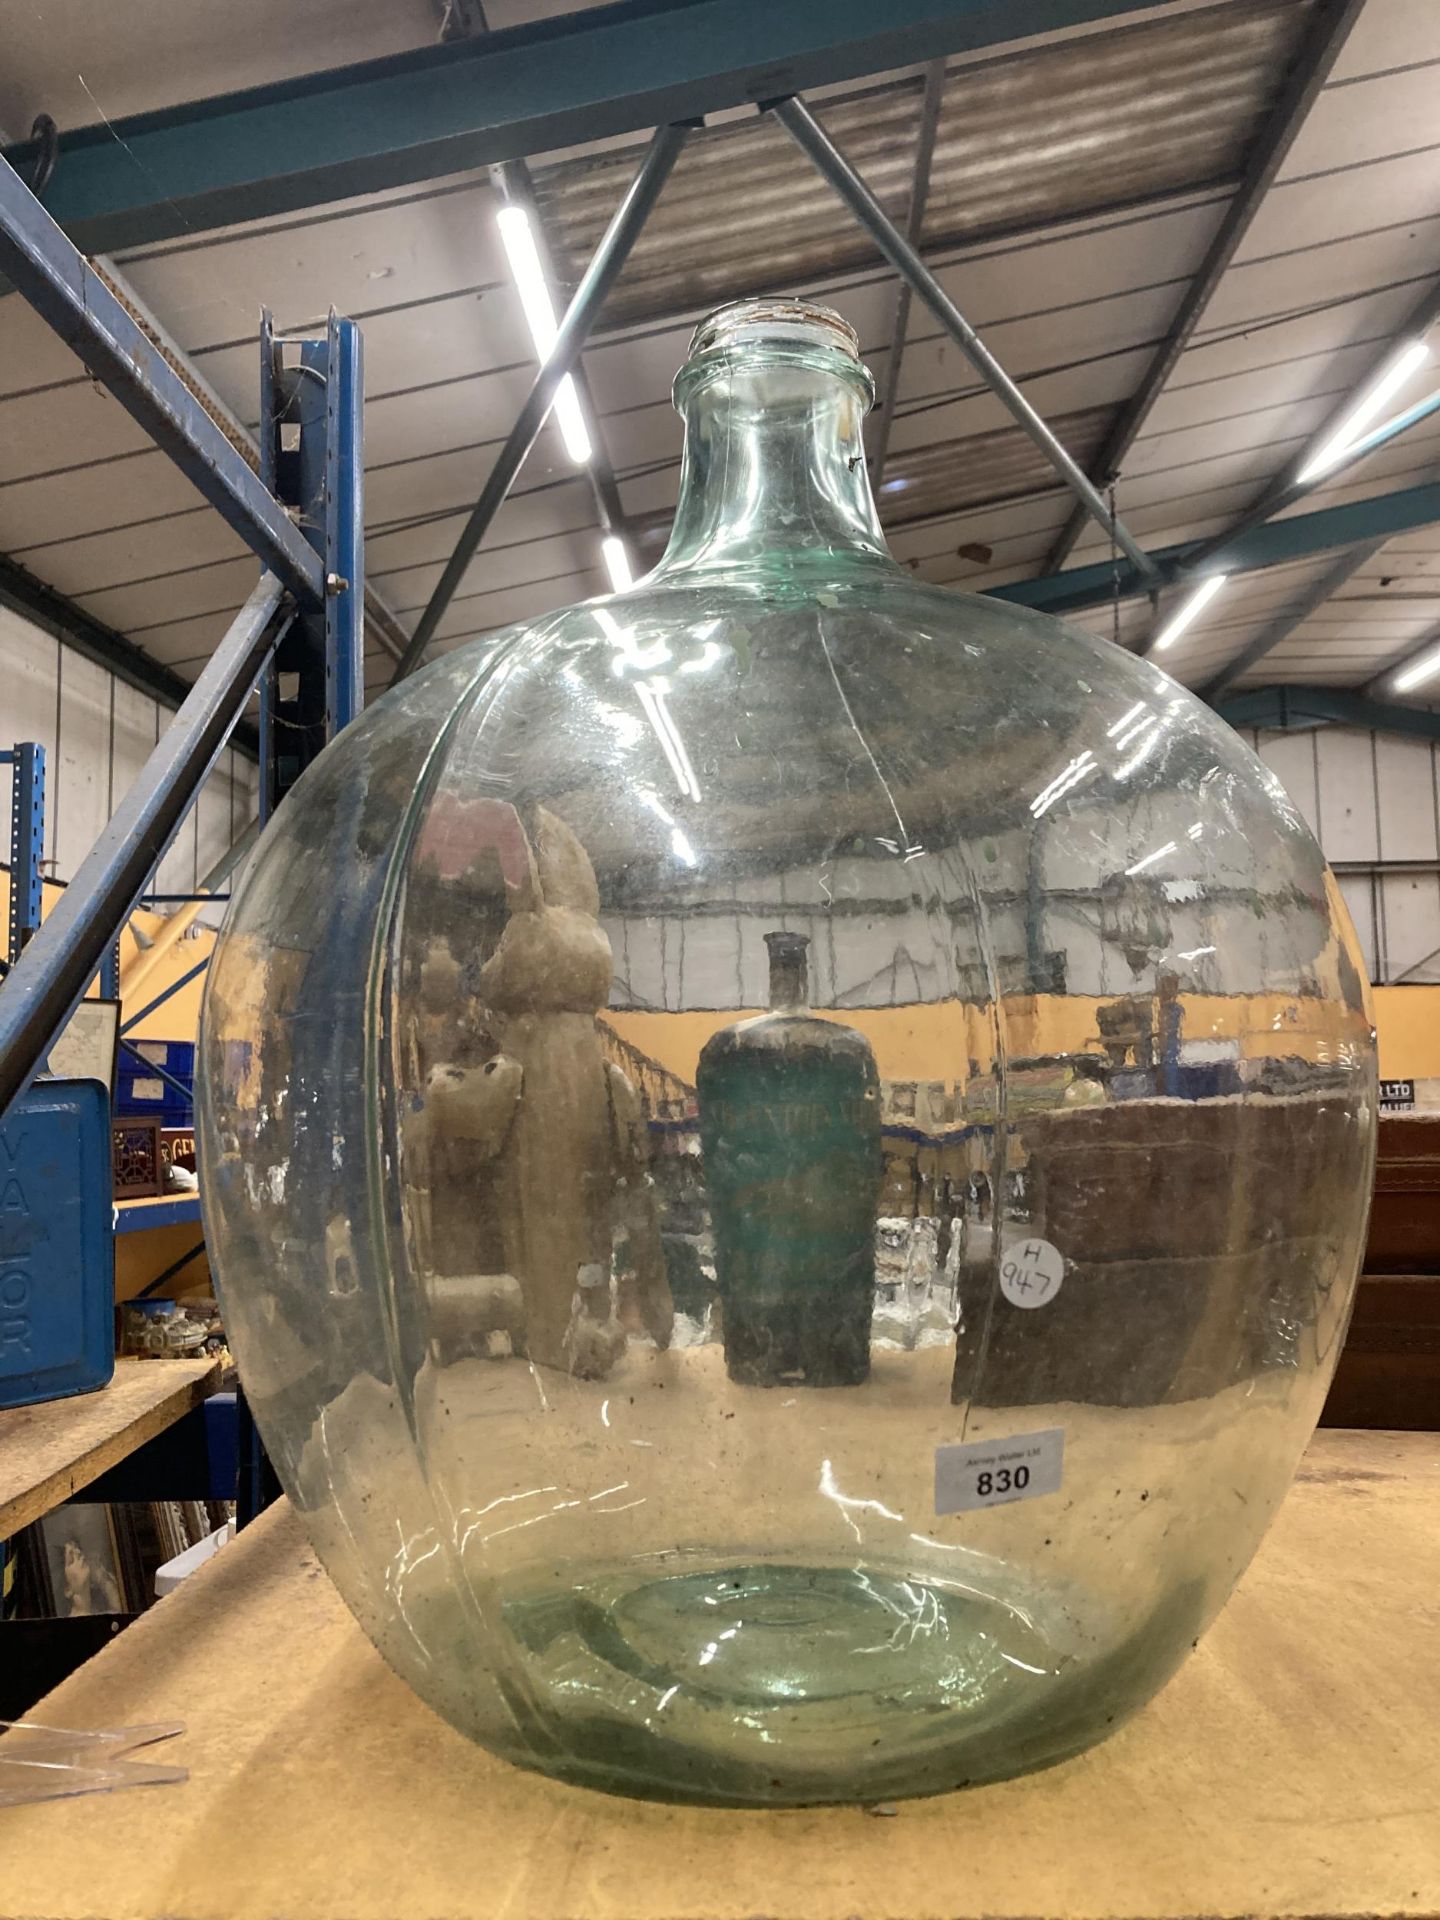 A VERY LARGE VINTAGE GLASS CARBOY BOTTLE, HEIGHT APPROX 60CM, DIAMETER AT THE MIDDLE APPROX 40CM